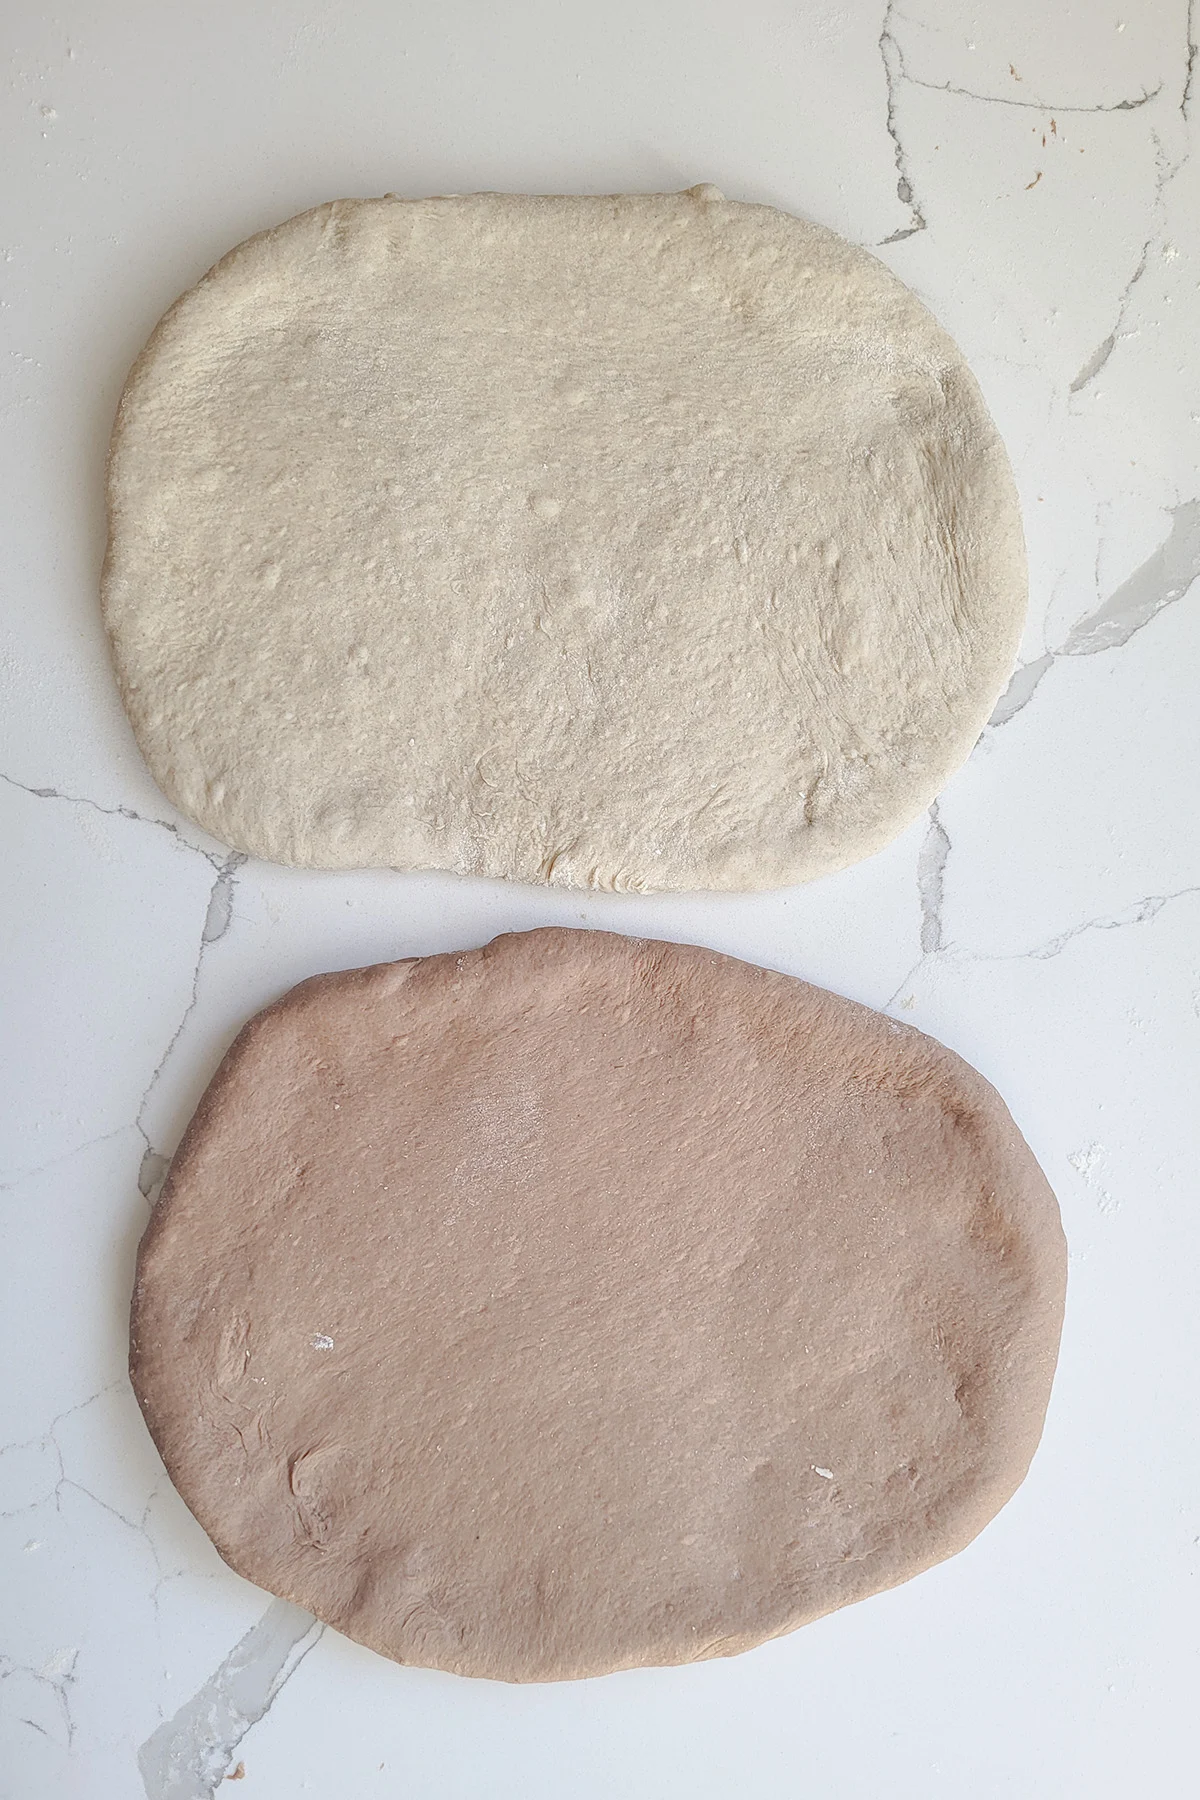 an oval or light bread dough and an oval of dark bread dough on a marble surface.